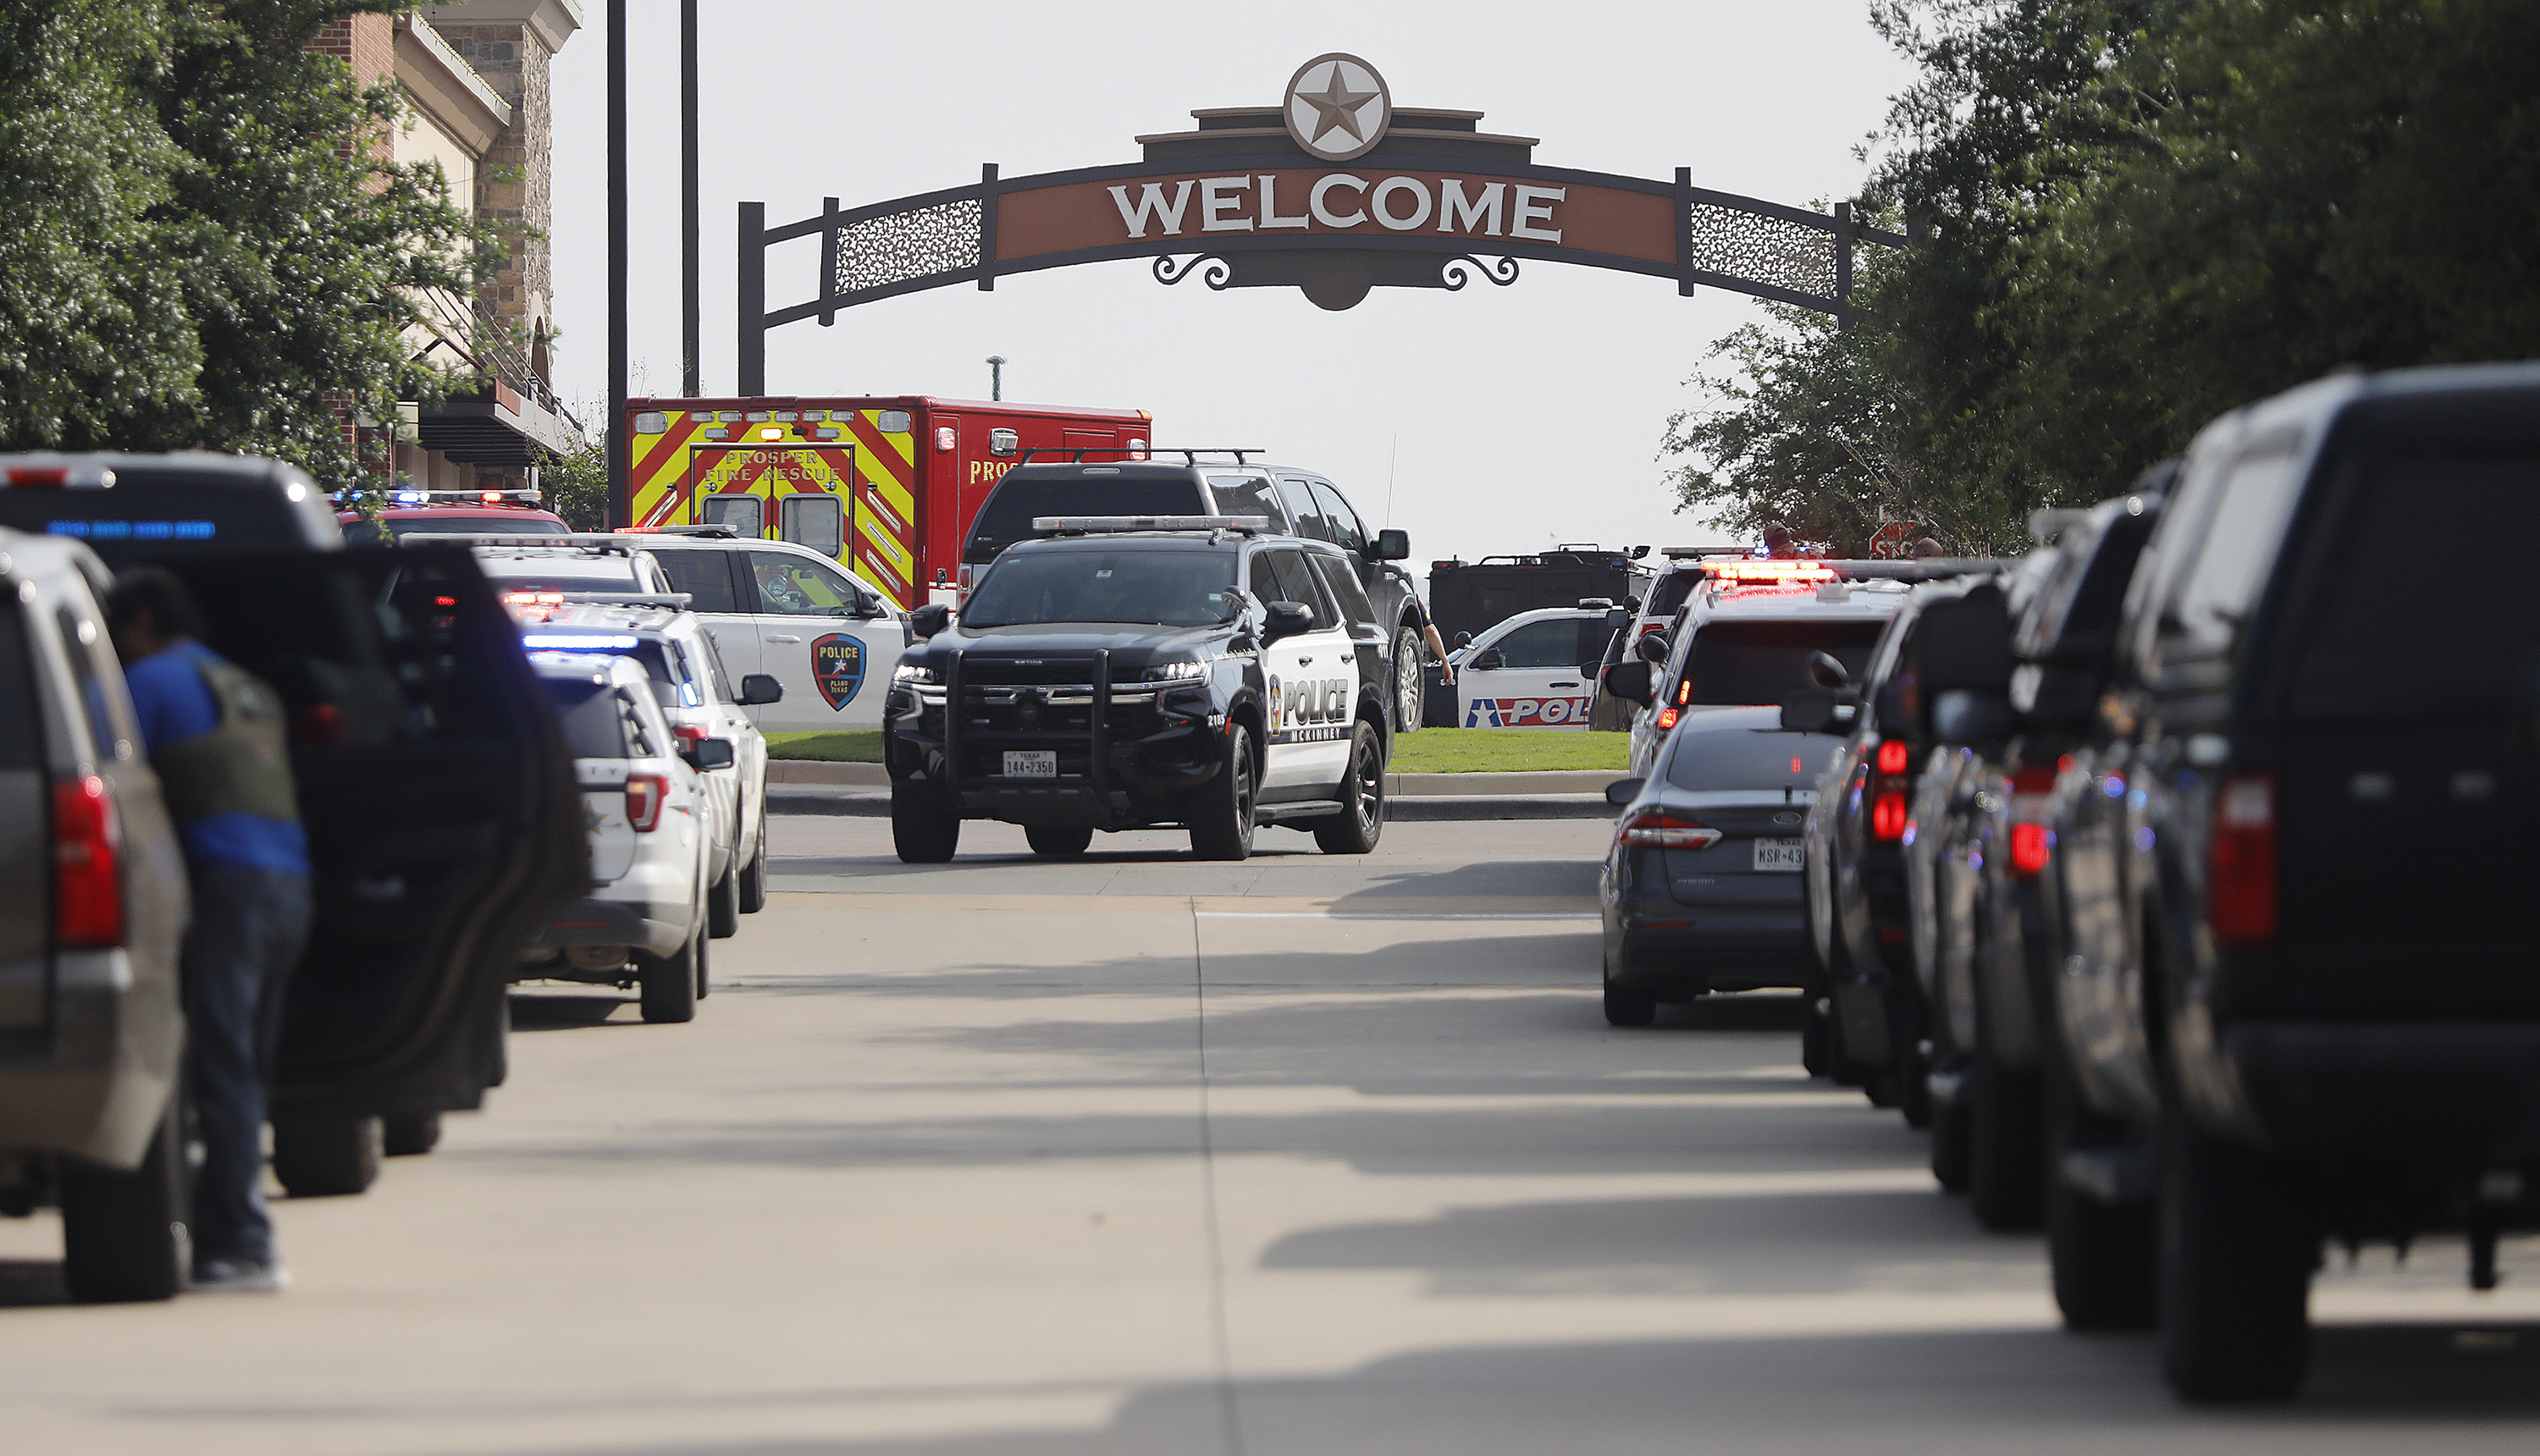 Emergency vehicles line the entrance to the Allen Premium Outlets where a shooting took place on Saturday in Allen, Texas.